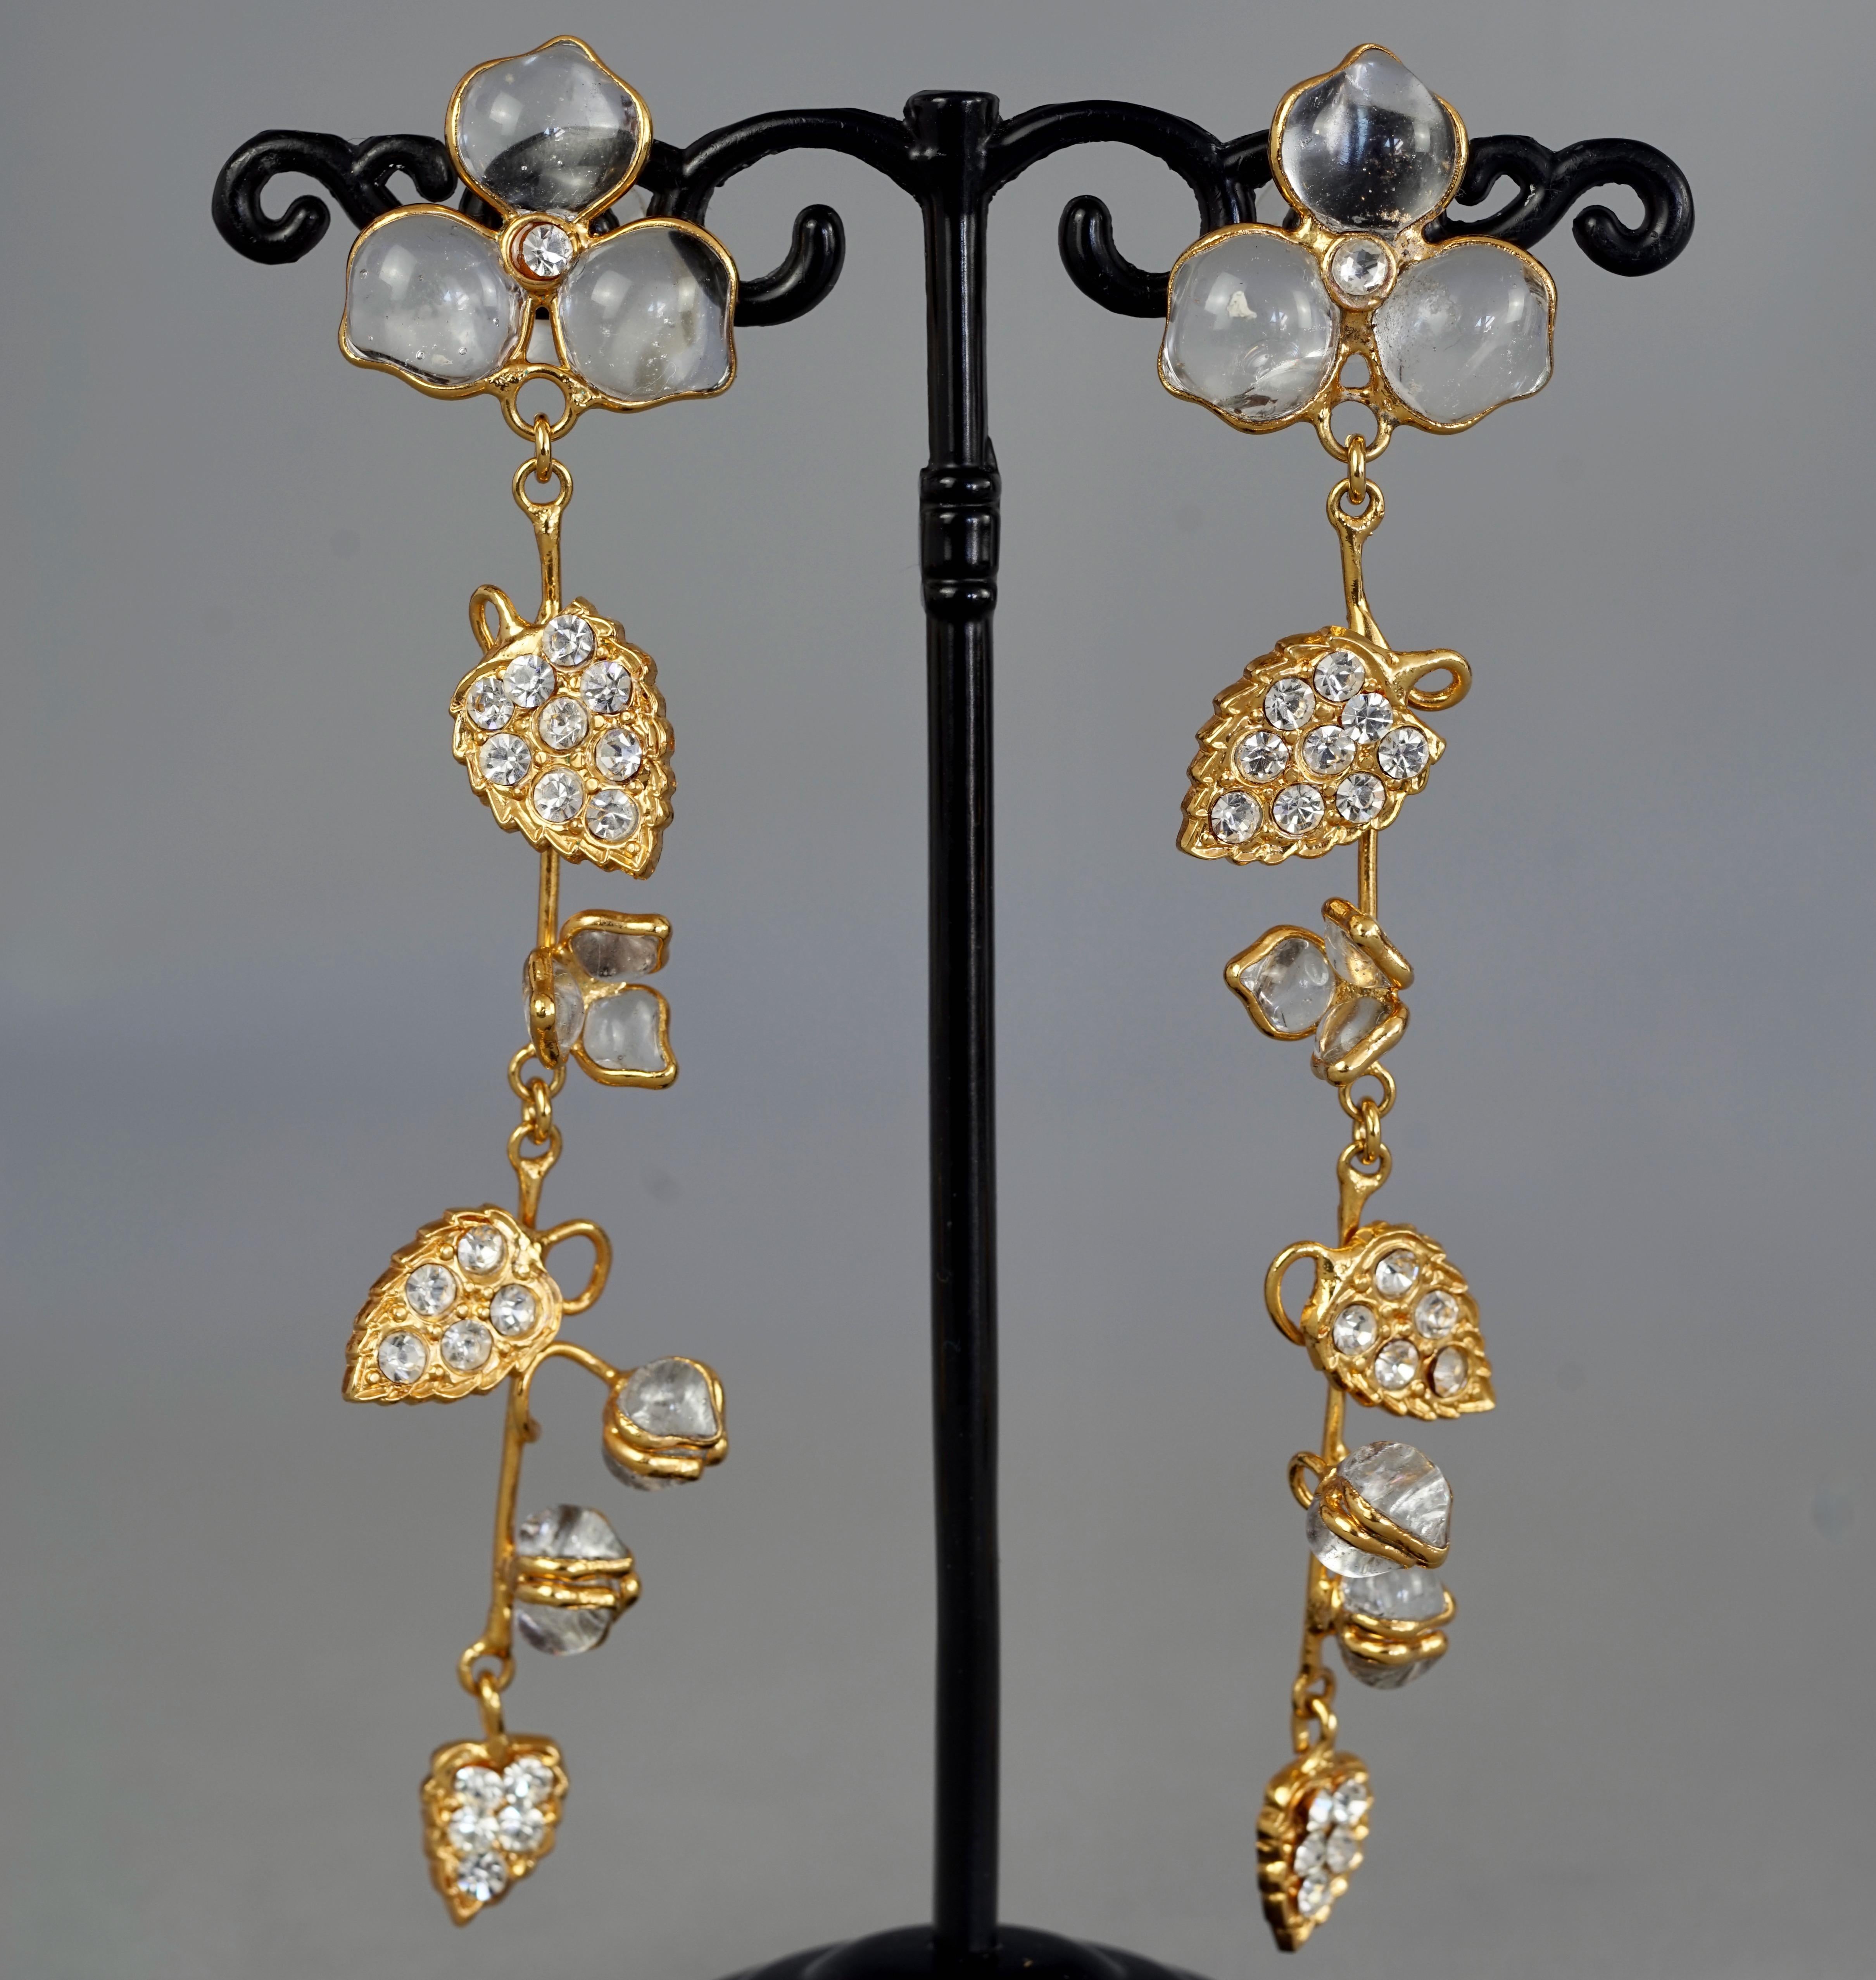 Vintage AUGUSTINE PARIS by Thierry GRIPOIX Flower Vine Dangling Earrings In Excellent Condition For Sale In Kingersheim, Alsace